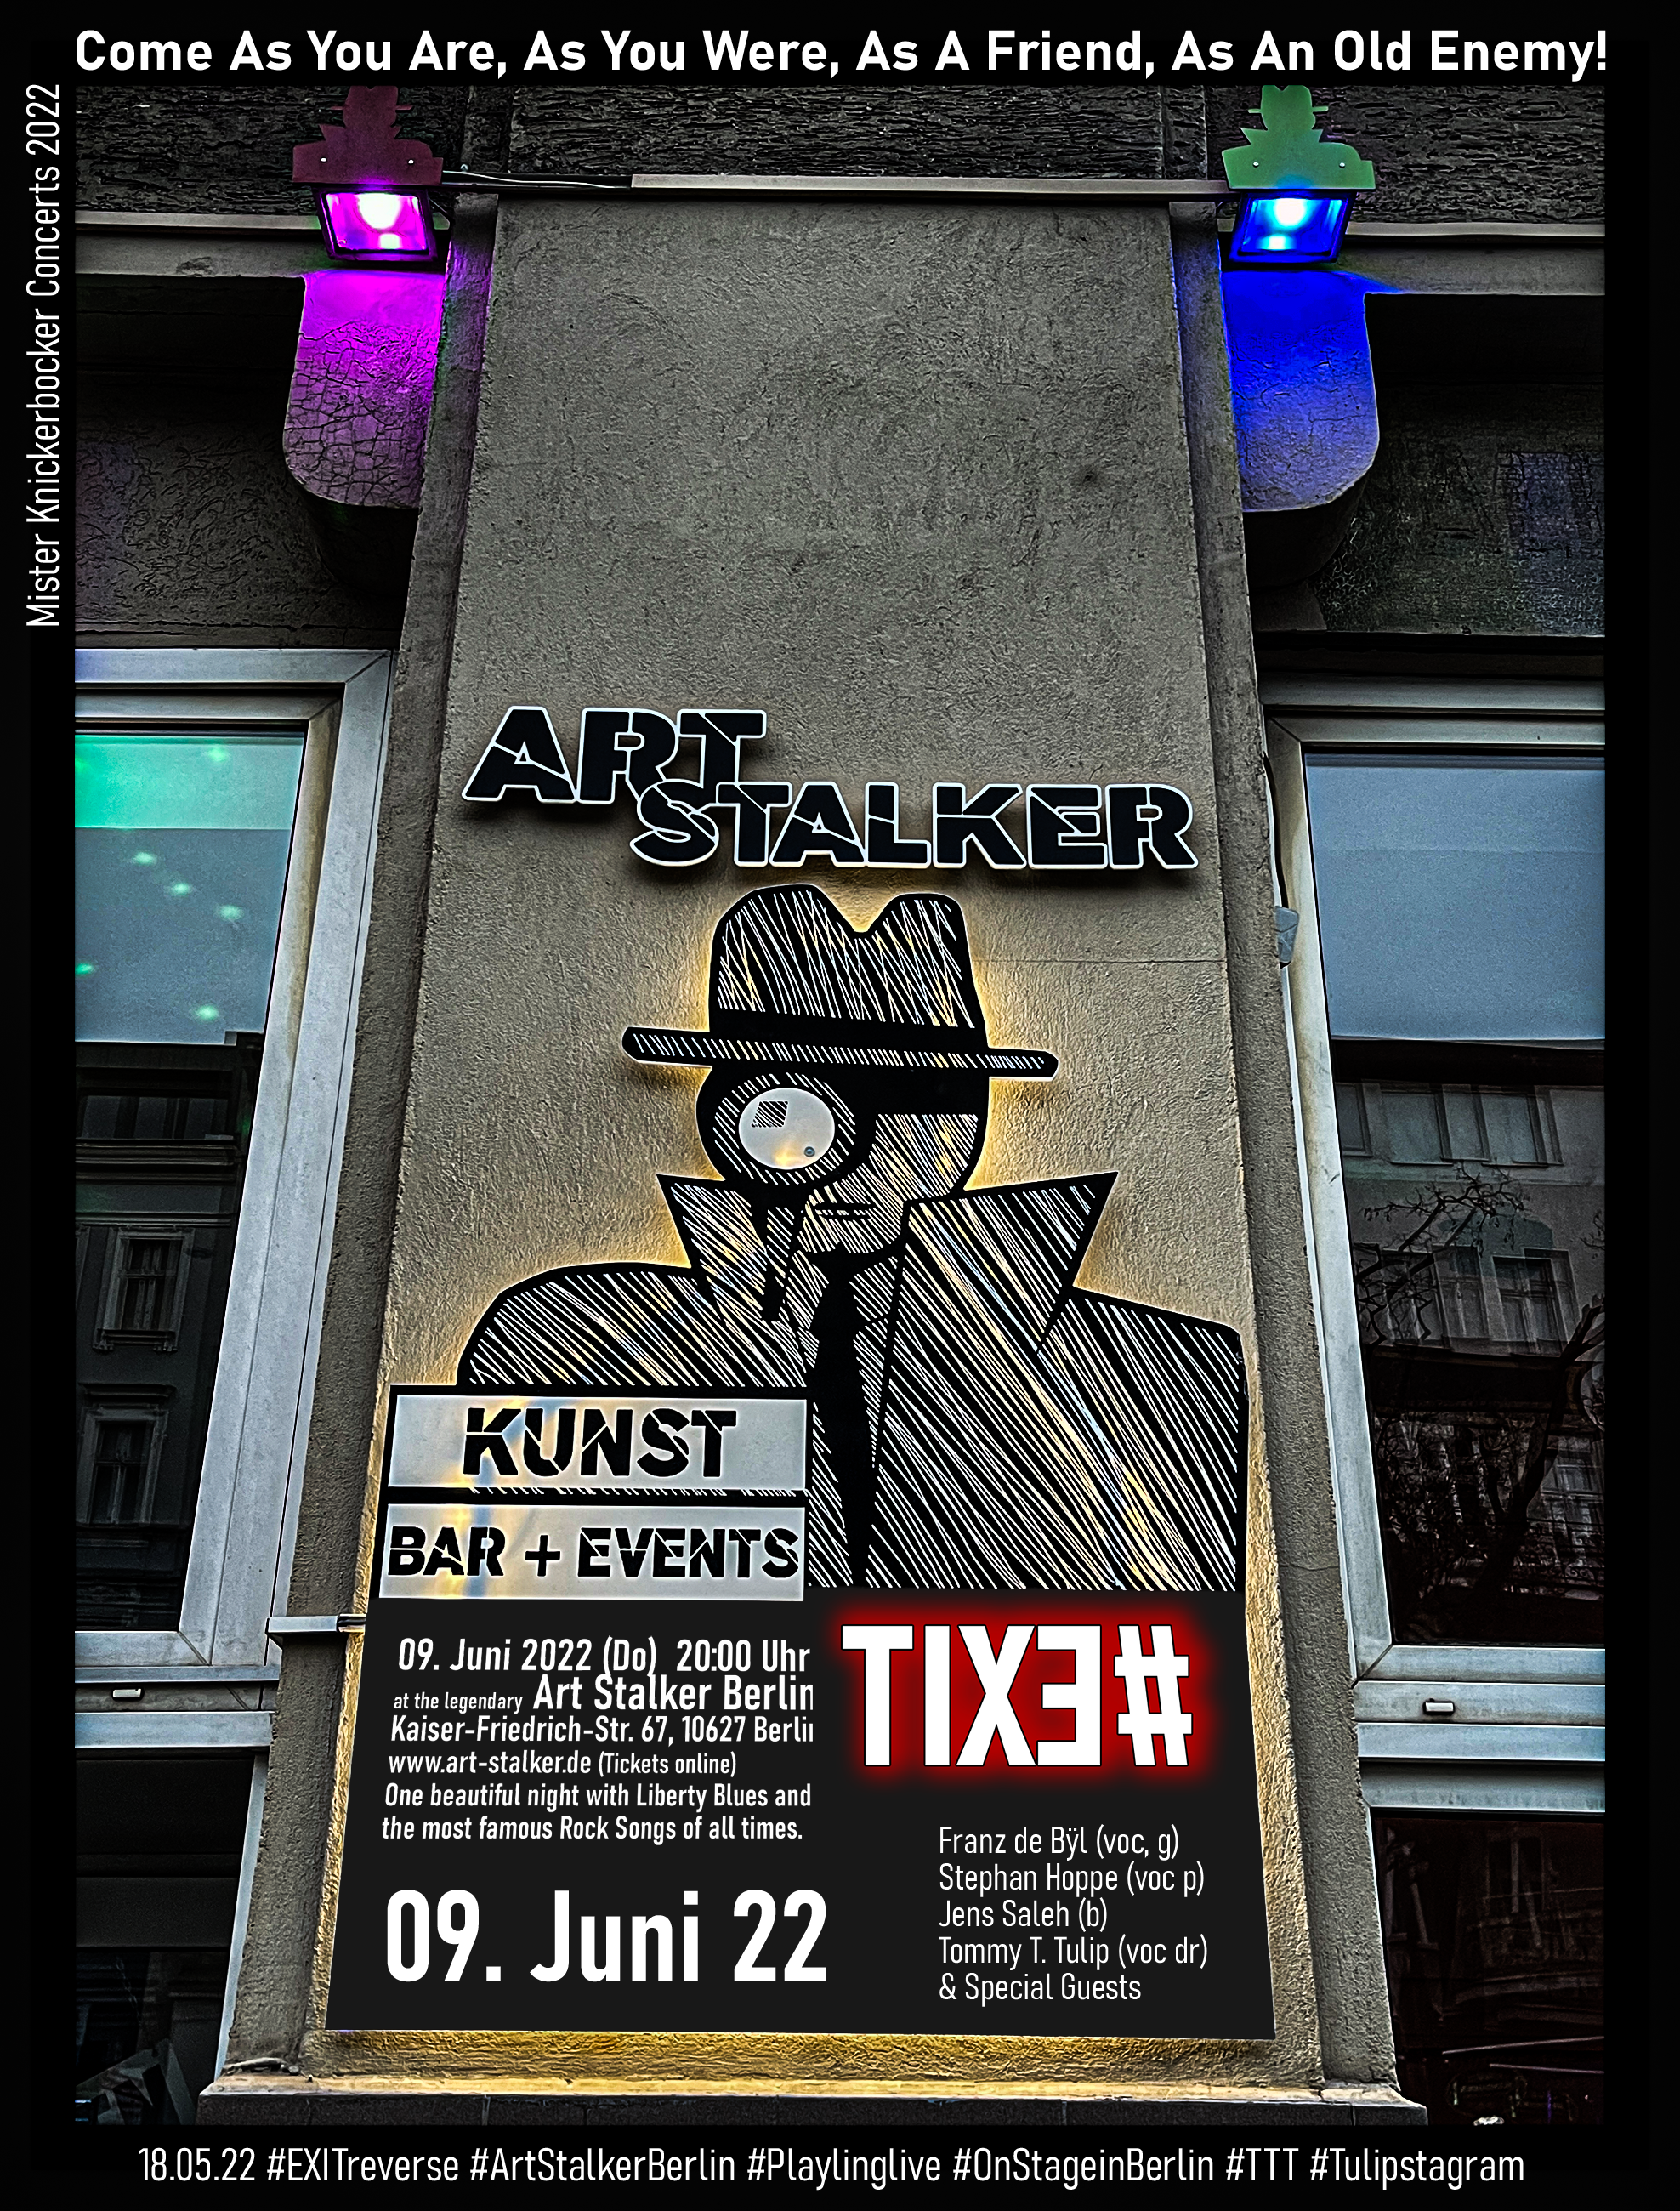 Save The Date: 09. Juni 22 (Do) um 20 Uhr at the legendary Art Stalker Berlin - One night with Liberty Blues and the most famous Rock Songs of all times. - Published 18.05.22 #EXITreverse #ArtStalkerBerlin #Playlinglive #OnStageinBerlin #TTT #Tulipstagram